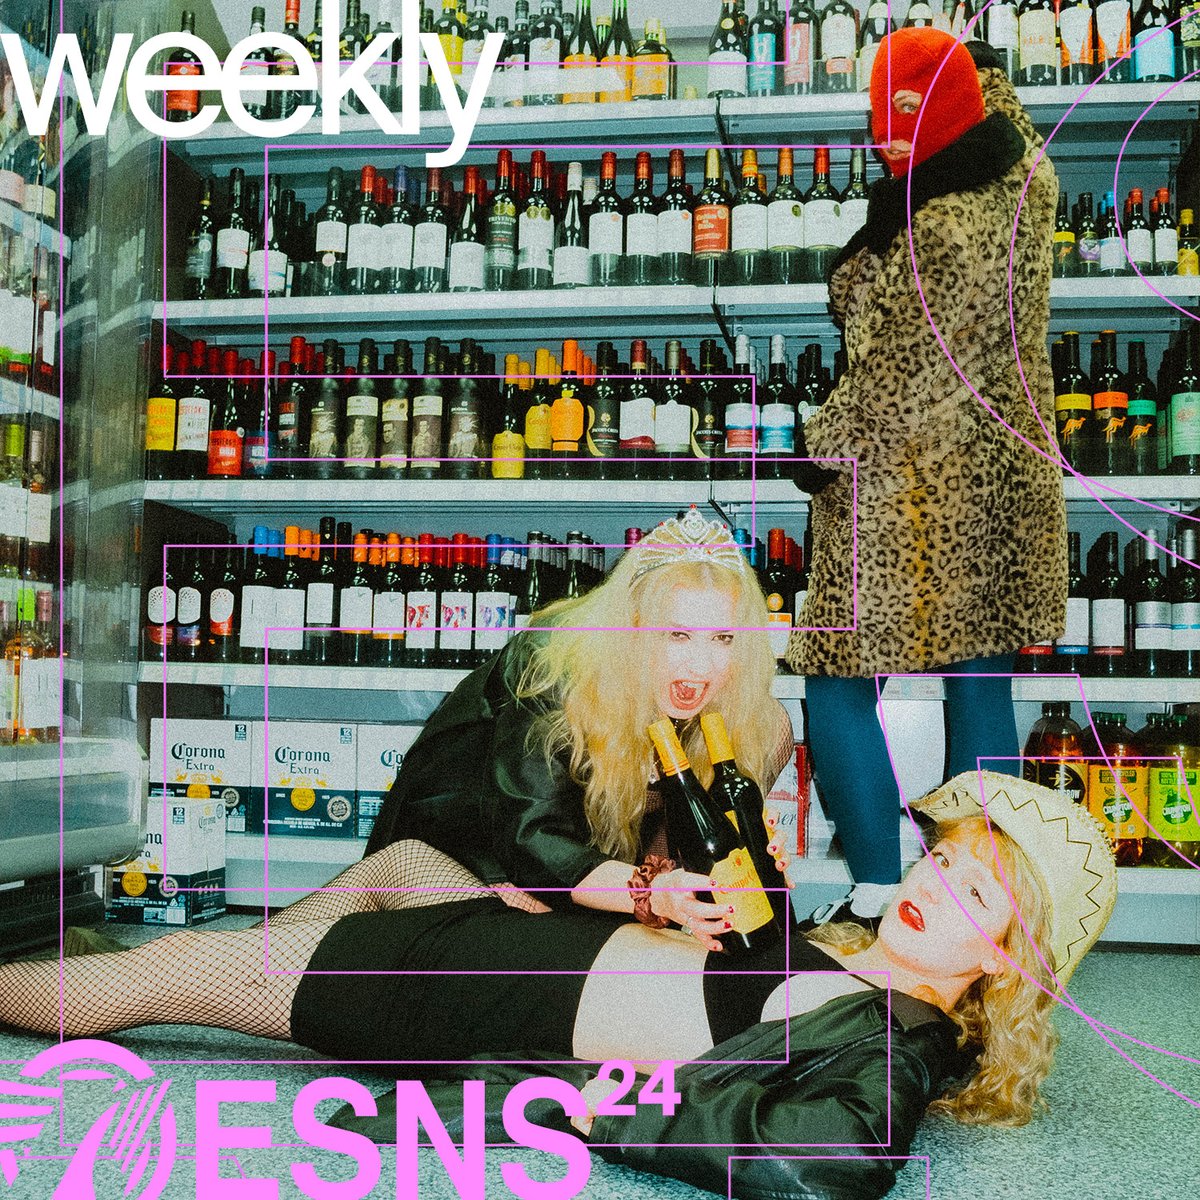 Check out this week's ESNS Weekly playlist bursting with the newest tracks from #ESNS24 acts! Get ready to be blown away by the incredible sounds of @Lambrini_Girls, @TRAMHAUSrtm, @honestyrhere and many more! Tune in now at sdz.sh/T18YgK